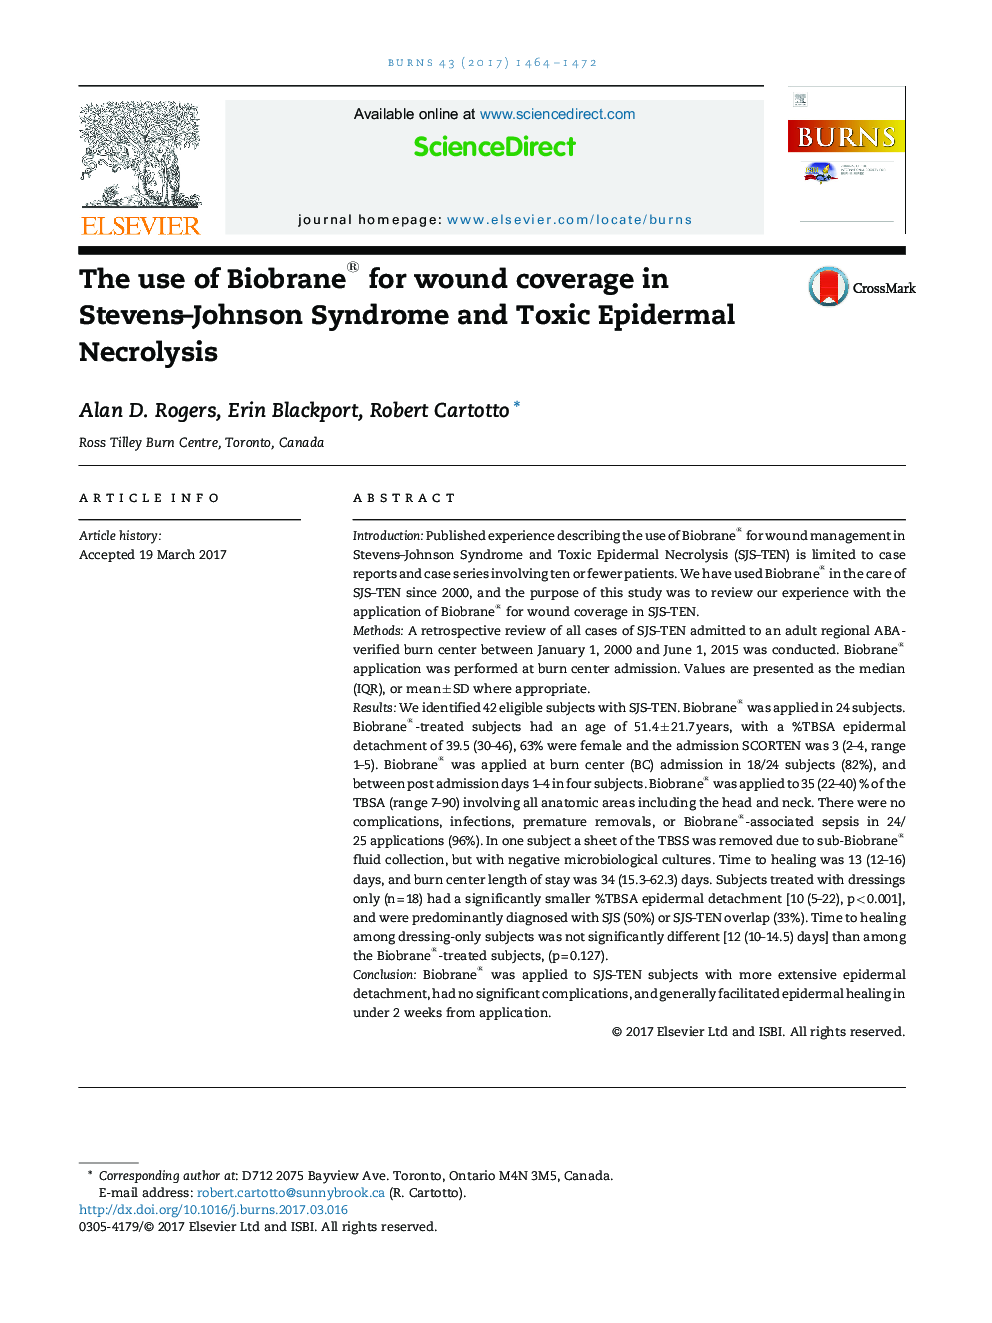 The use of Biobrane® for wound coverage in Stevens-Johnson Syndrome and Toxic Epidermal Necrolysis